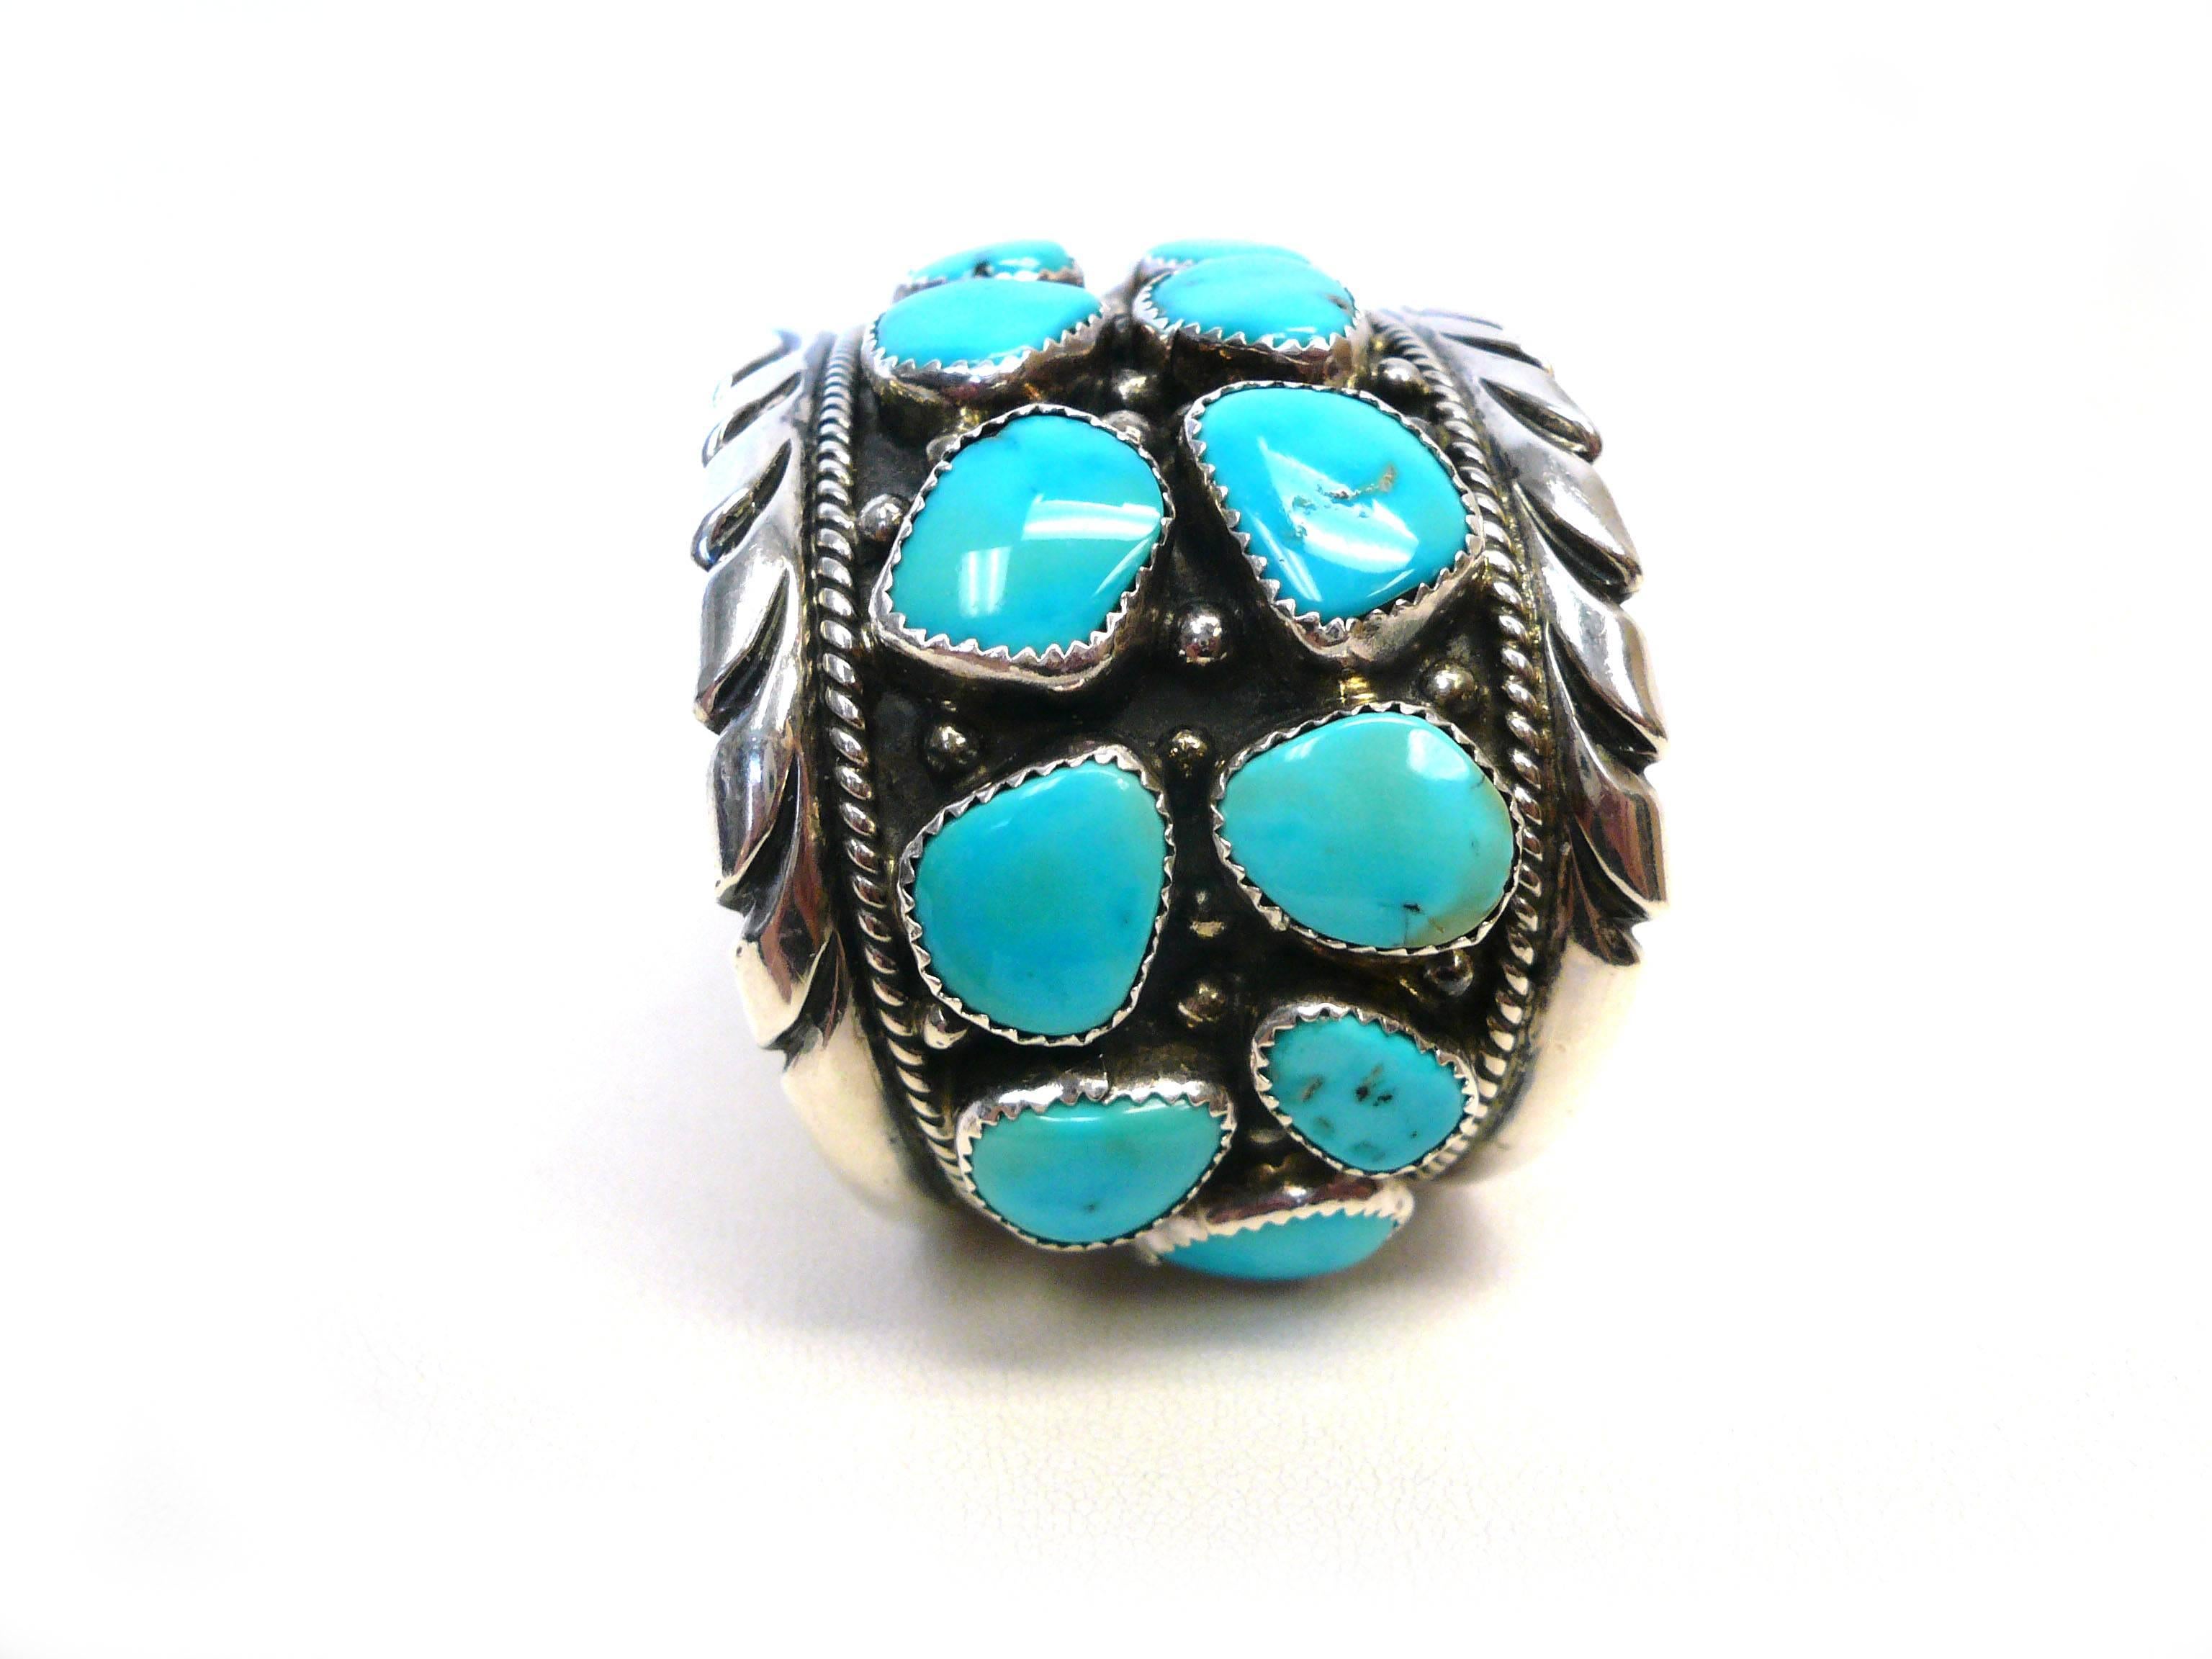 Handsome Native American Turquoise Sterling Cuff Bracelet 2